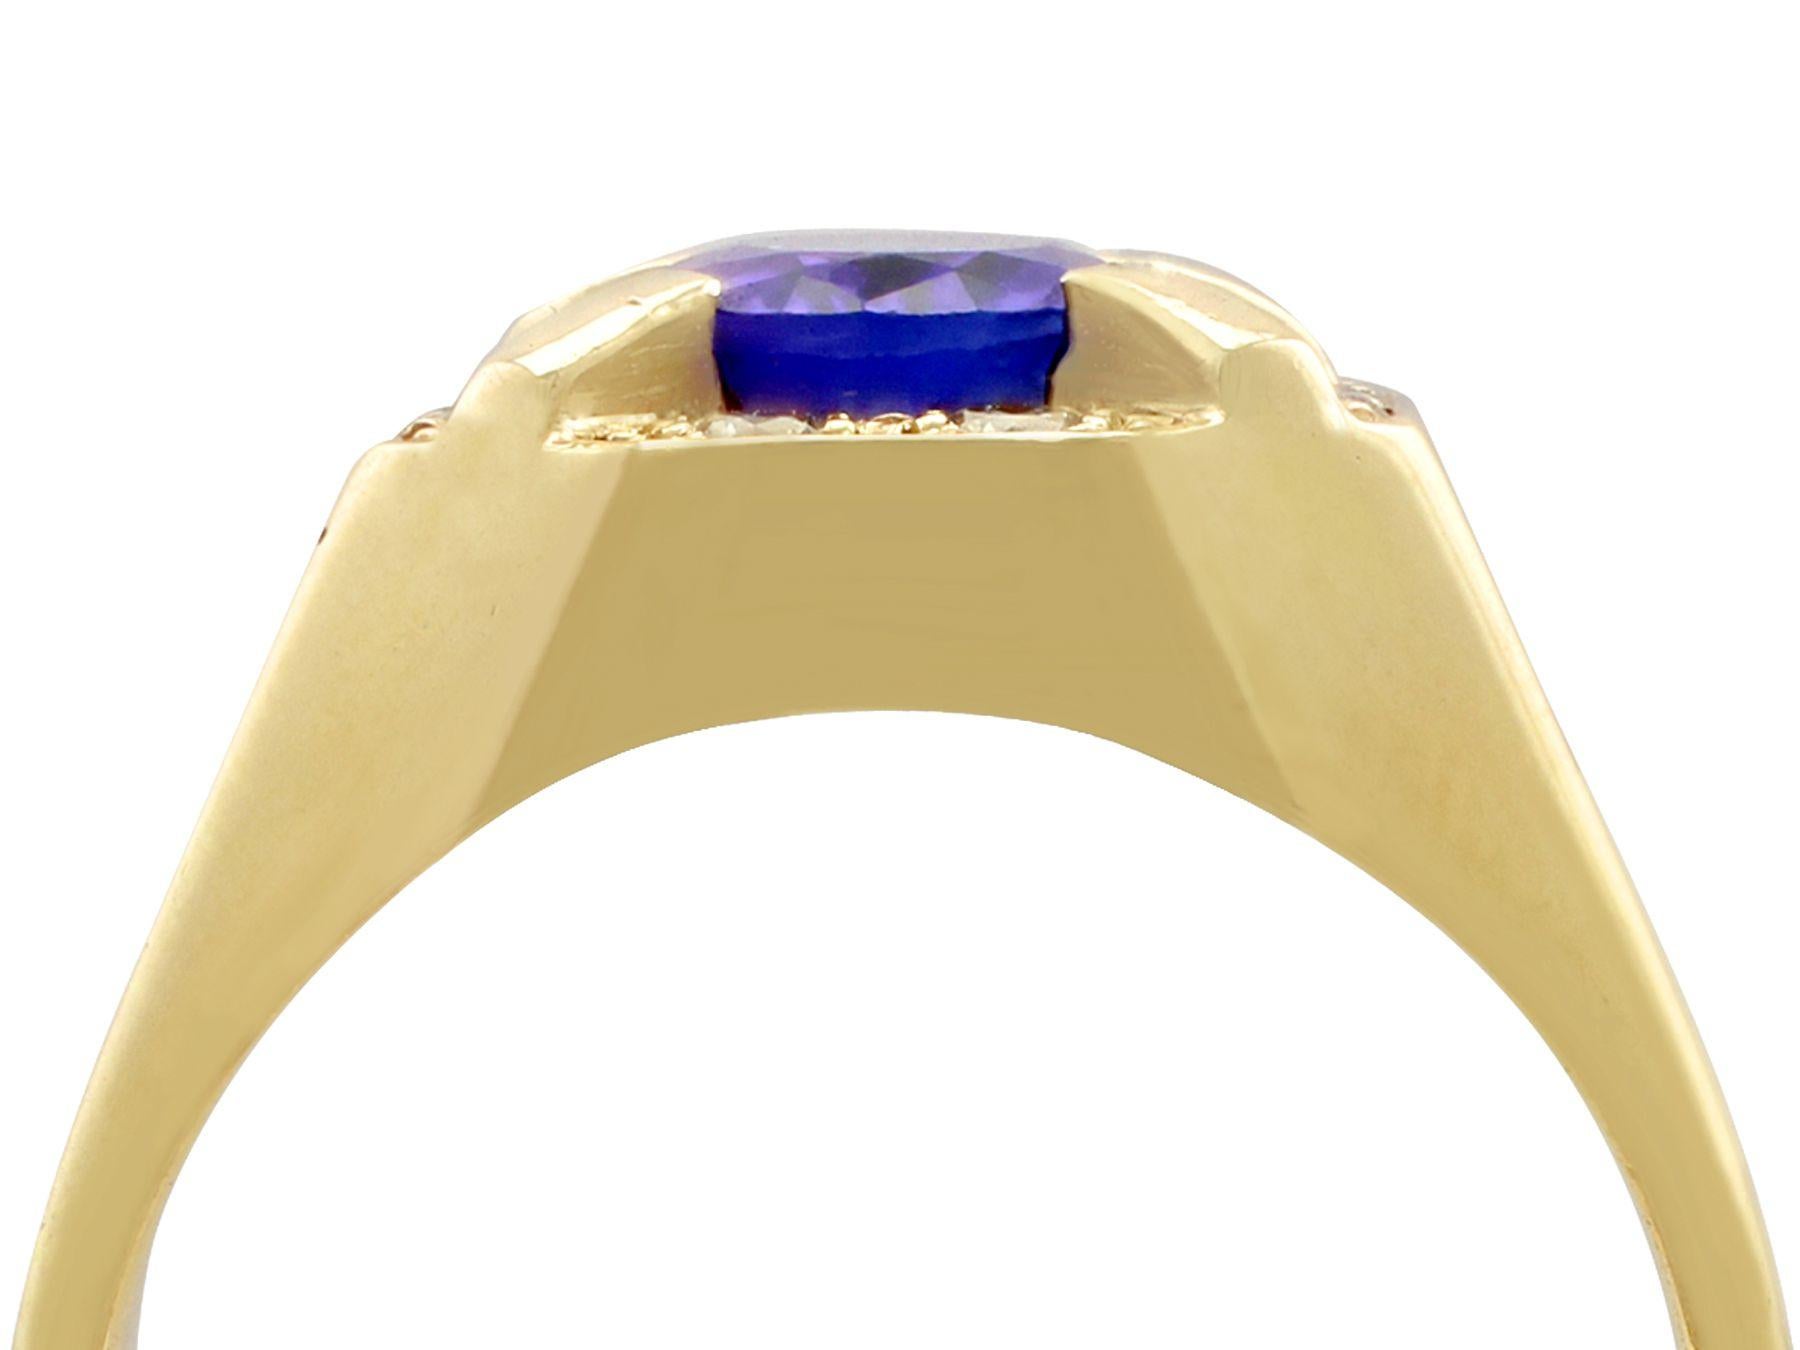 A stunning, fine and impressive modern 3.35 carat natural tanzanite and 0.50 carat diamond, 18 karat yellow gold dress ring; part our contemporary jewellery collections.

This stunning, fine and impressive contemporary tanzanite and diamond ring has